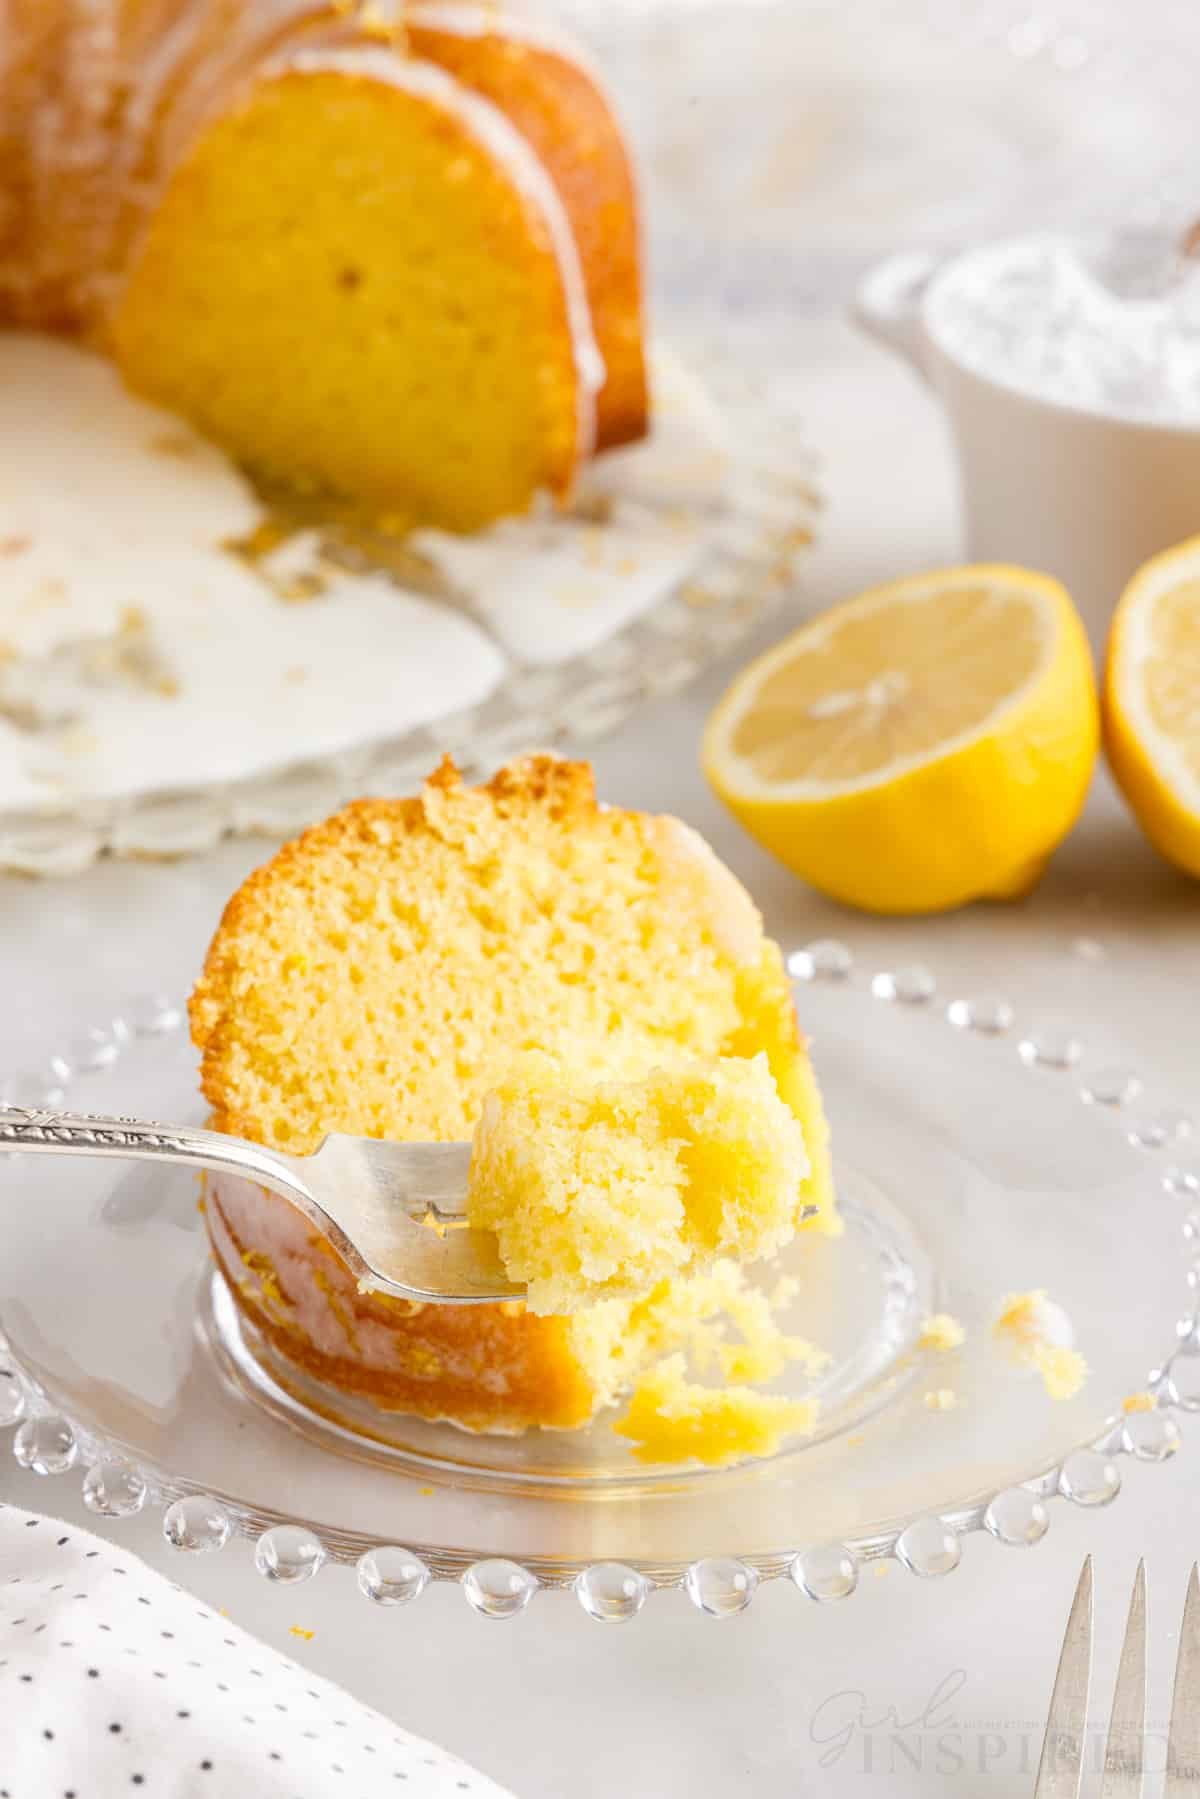 A small dish with a slice of Duncan Hines Lemon Cake on it, lemons and cake in the background.